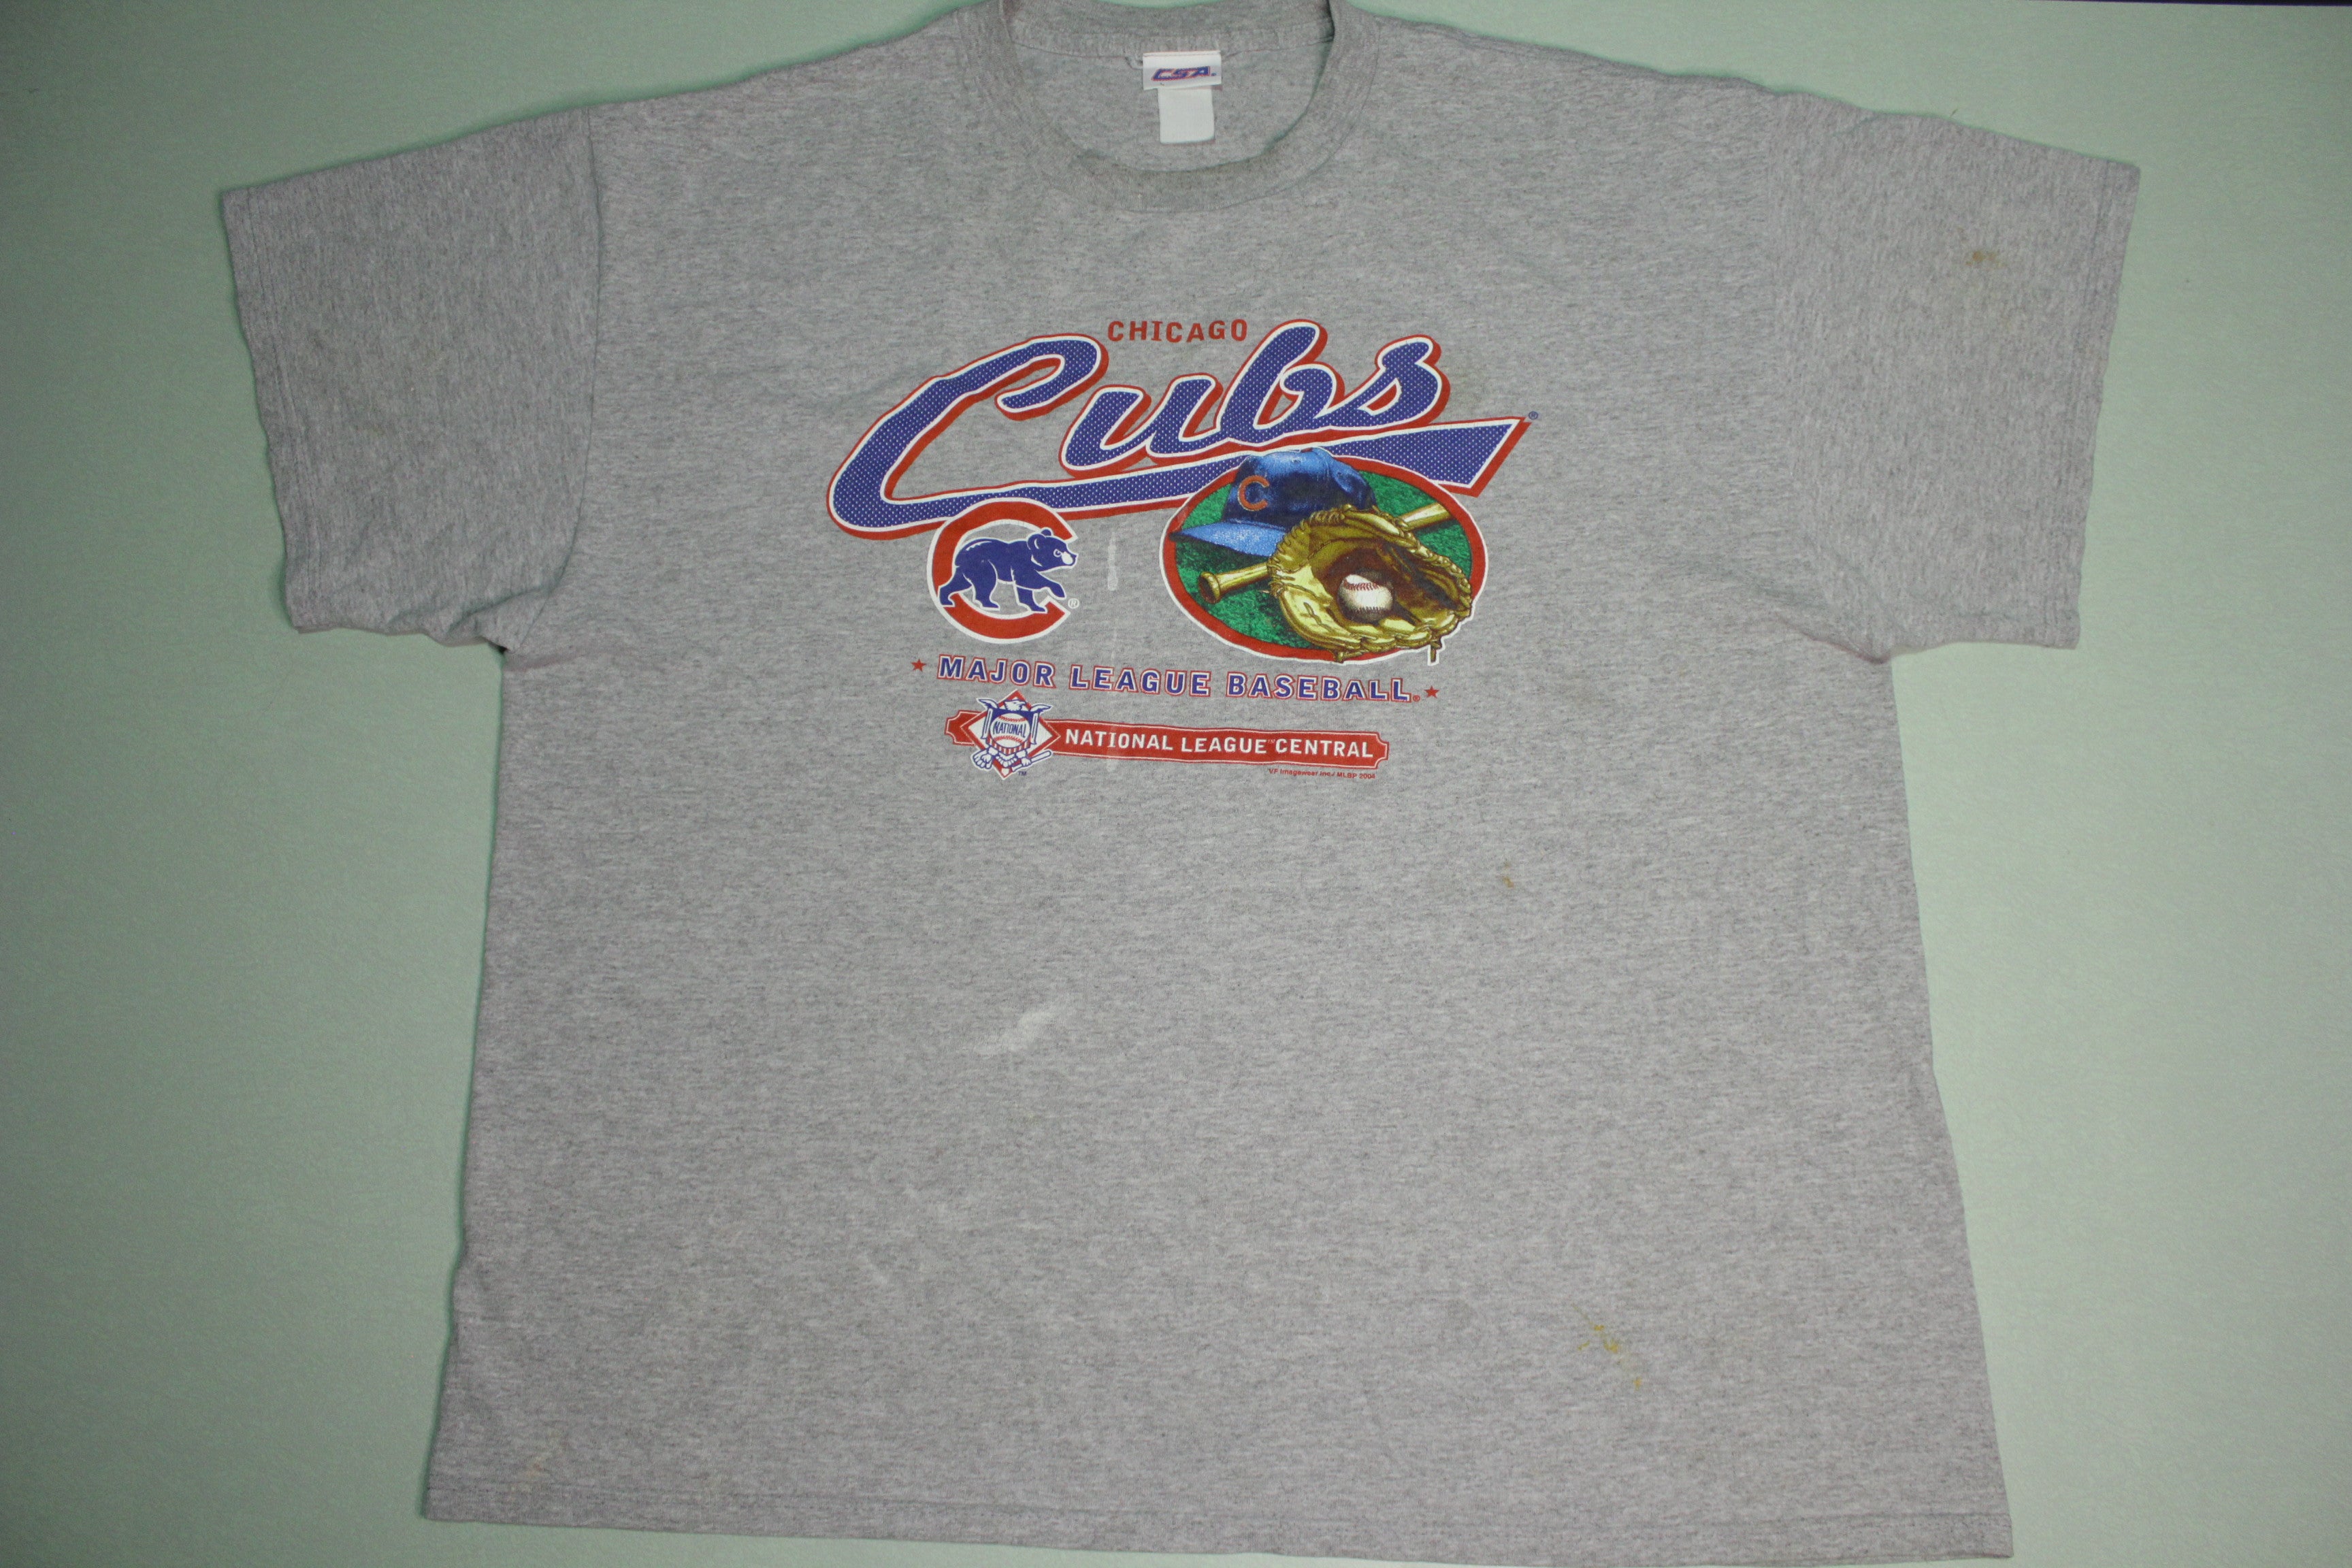 VF Imagewear Chicago Cubs MLB Shirts for sale